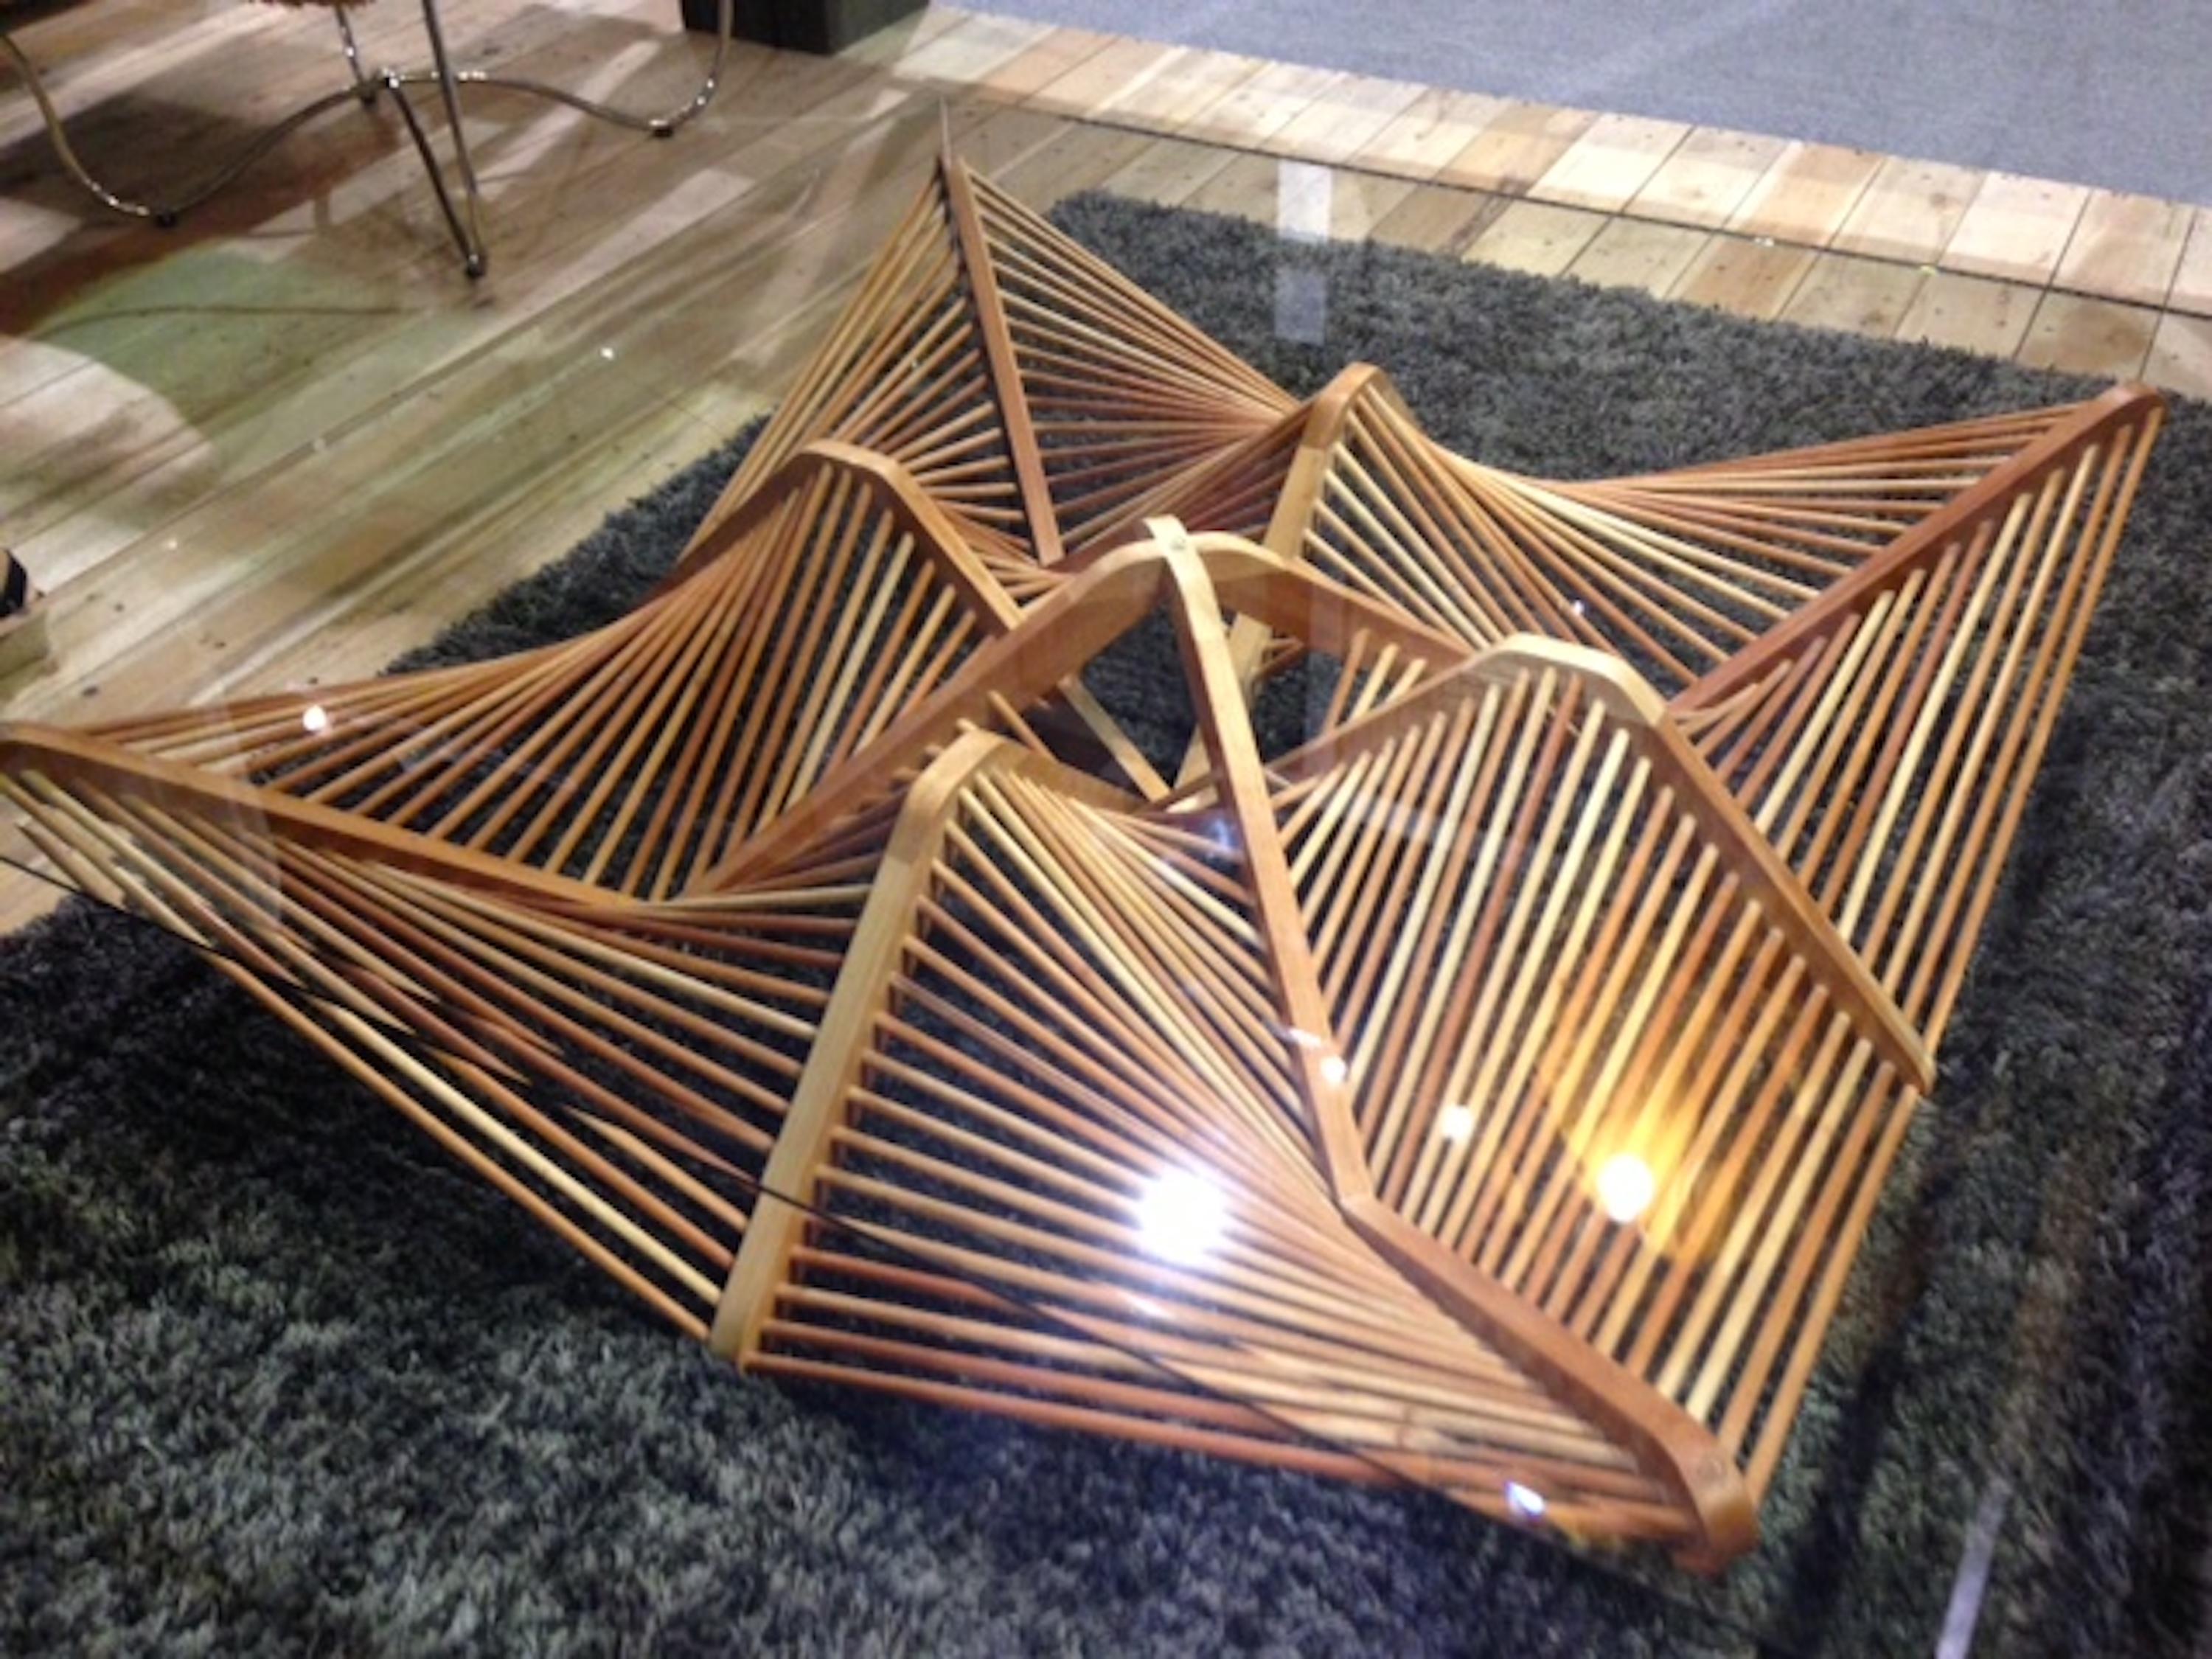 This innovative design, conceived by Vito Selma, showcases a captivating arrangement of geometric shapes crafted with lauan wood. The bold web of interconnected shapes adds an element of intrigue to the overall design. With its unique construction,